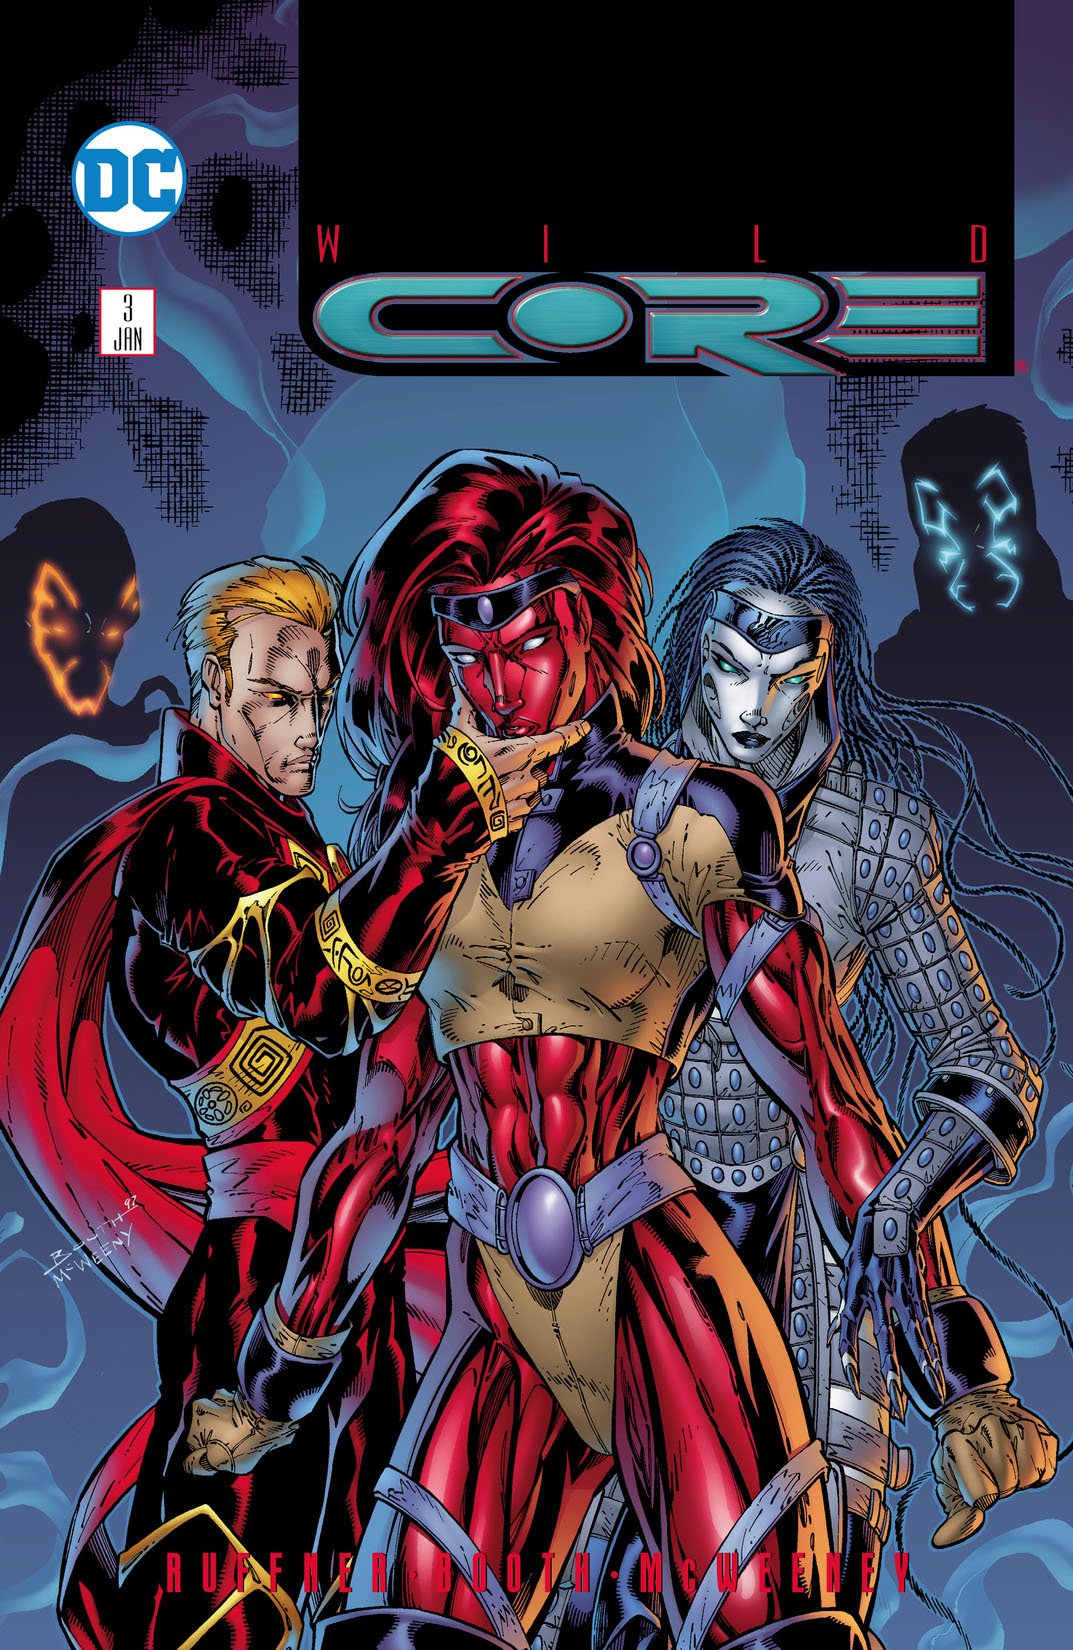 Wildcore #3 preview images